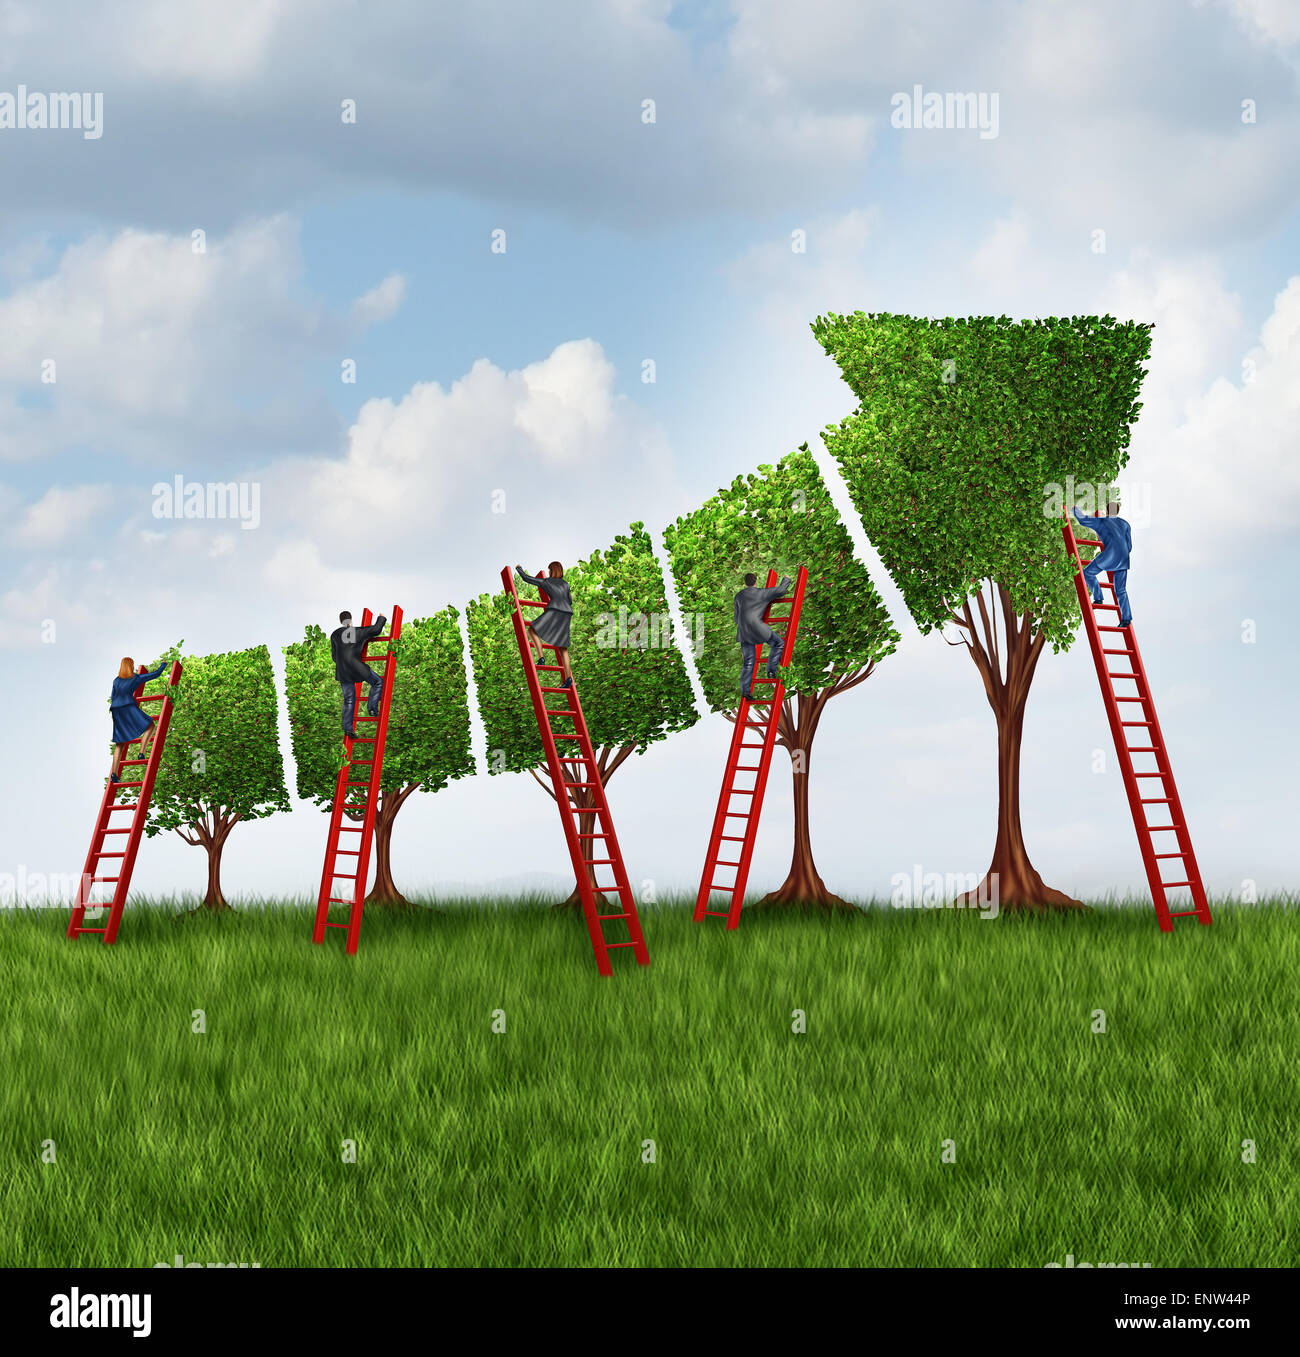 People group investing and financial services business concept as a team of corporate workers and employees with businessmen and businesswomen on a red ladder caring for trees shaped as a finance chart arrow going up. Stock Photo